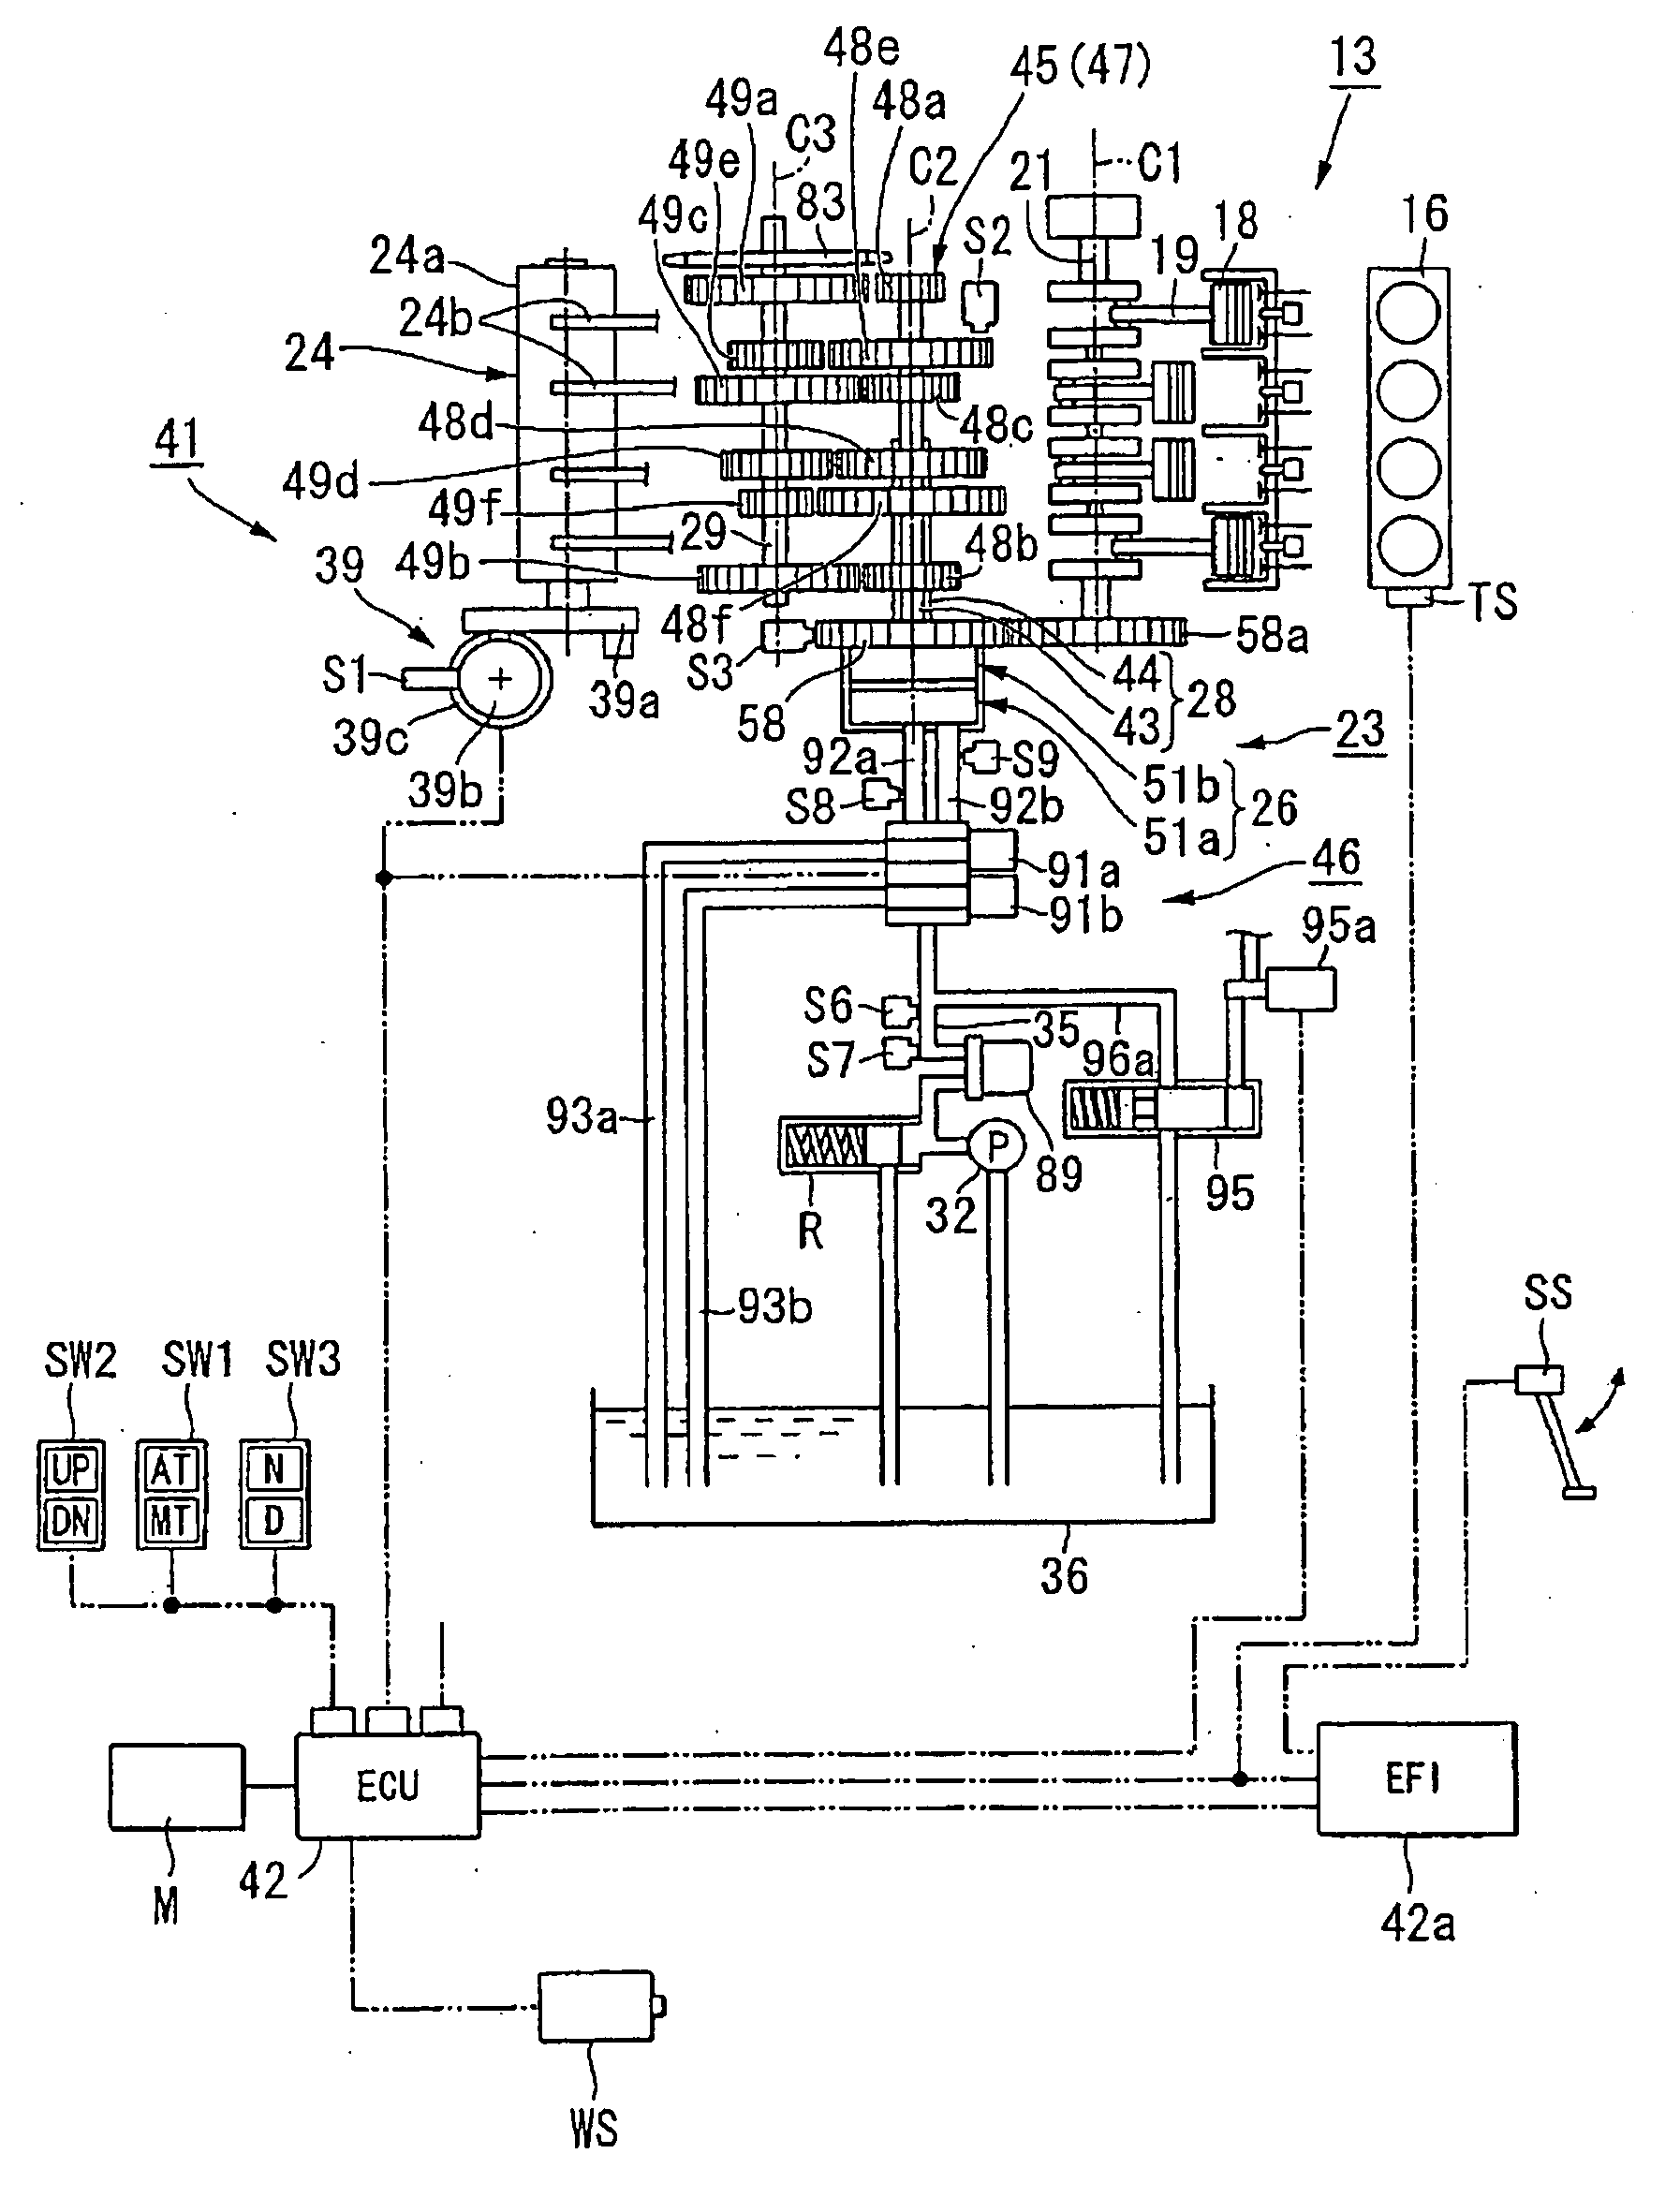 Clutch control system for vehicle